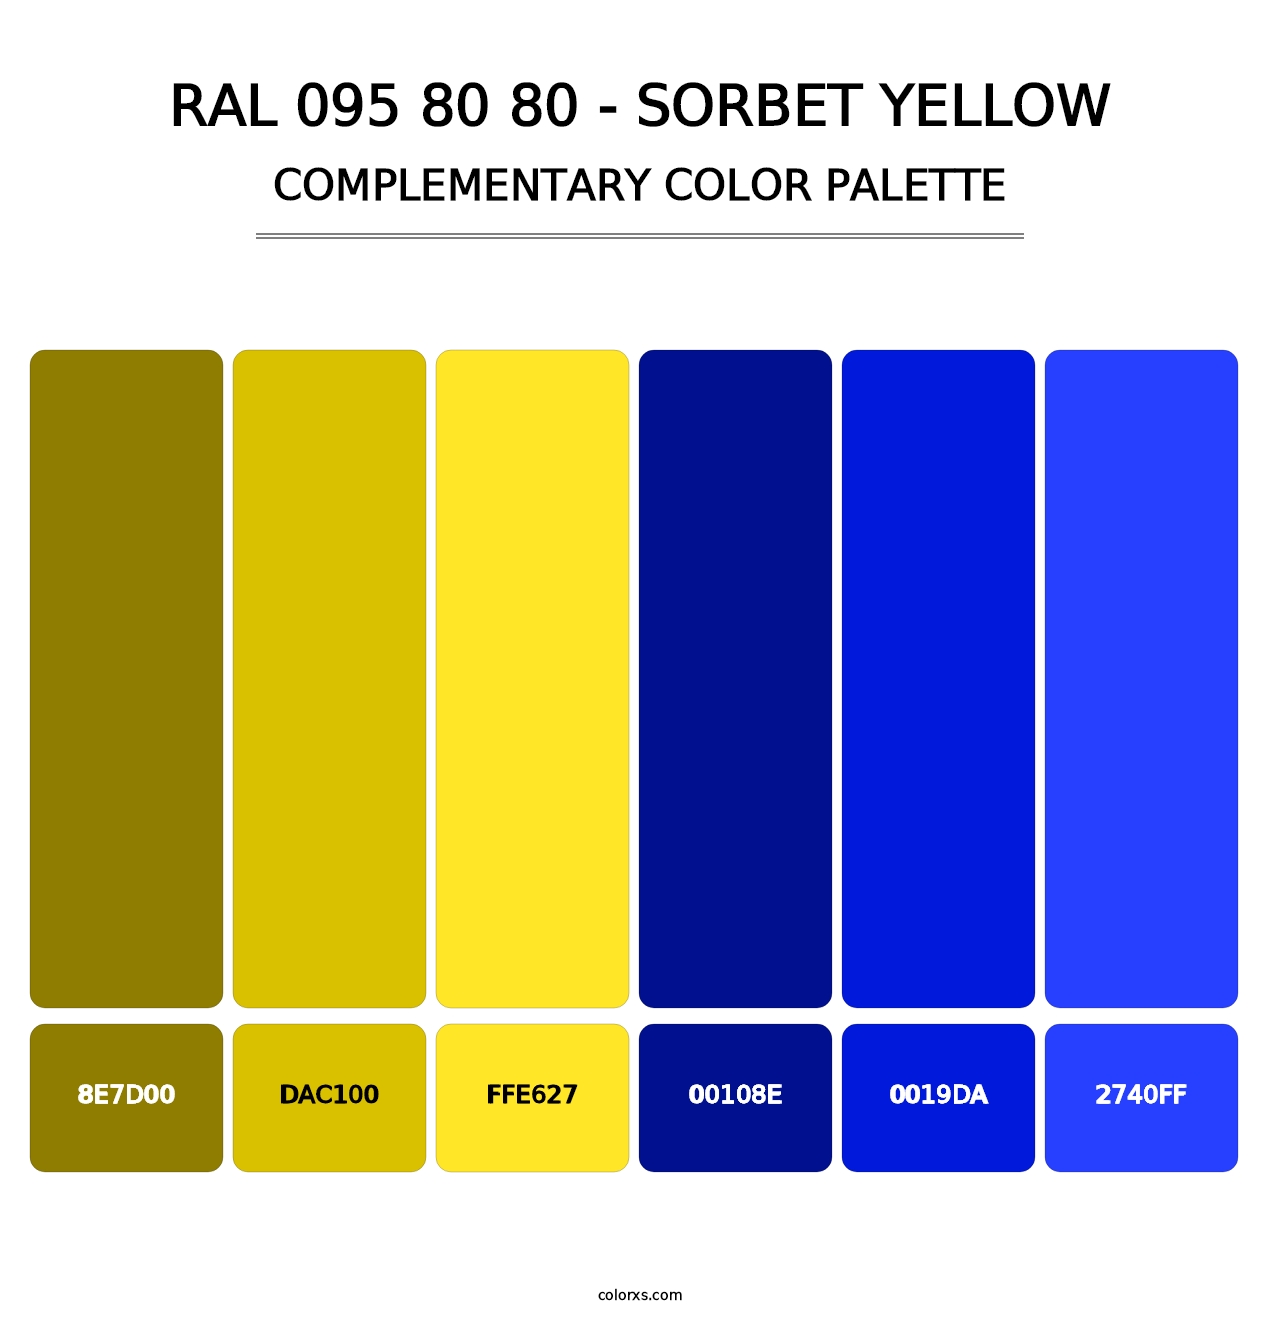 RAL 095 80 80 - Sorbet Yellow - Complementary Color Palette